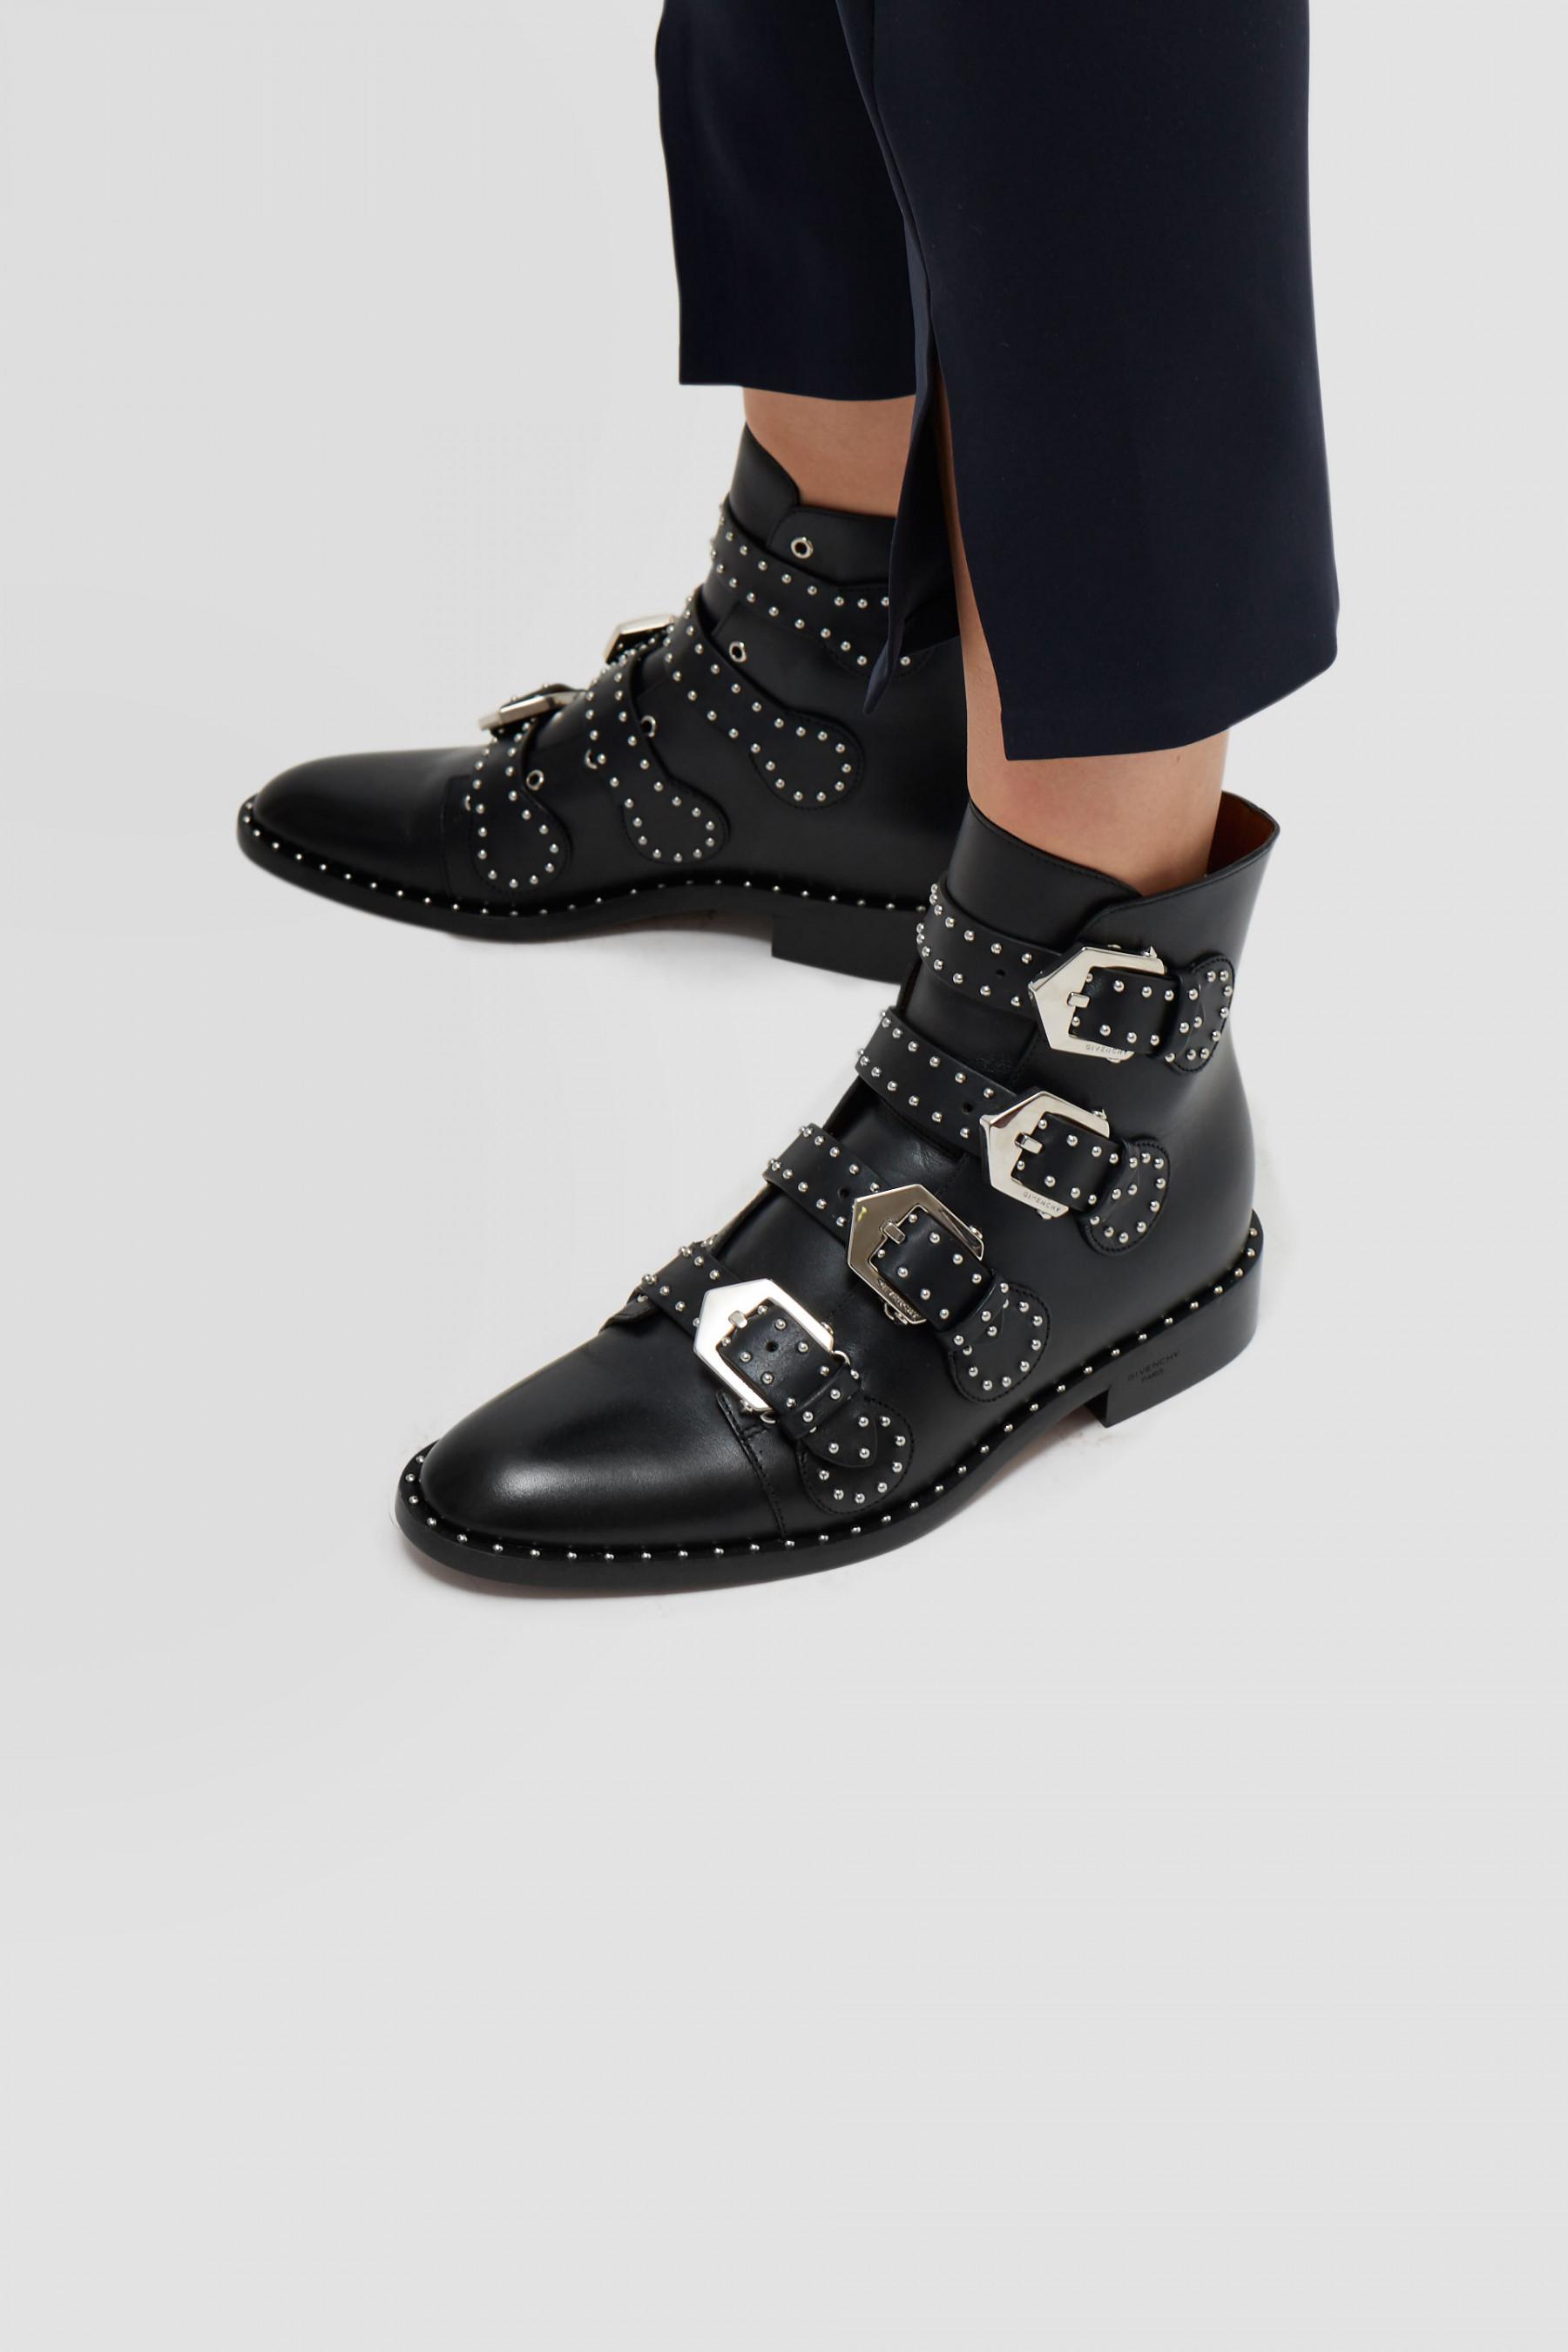 Givenchy 20mm Prue Studded Leather Ankle Boots in Black - Lyst